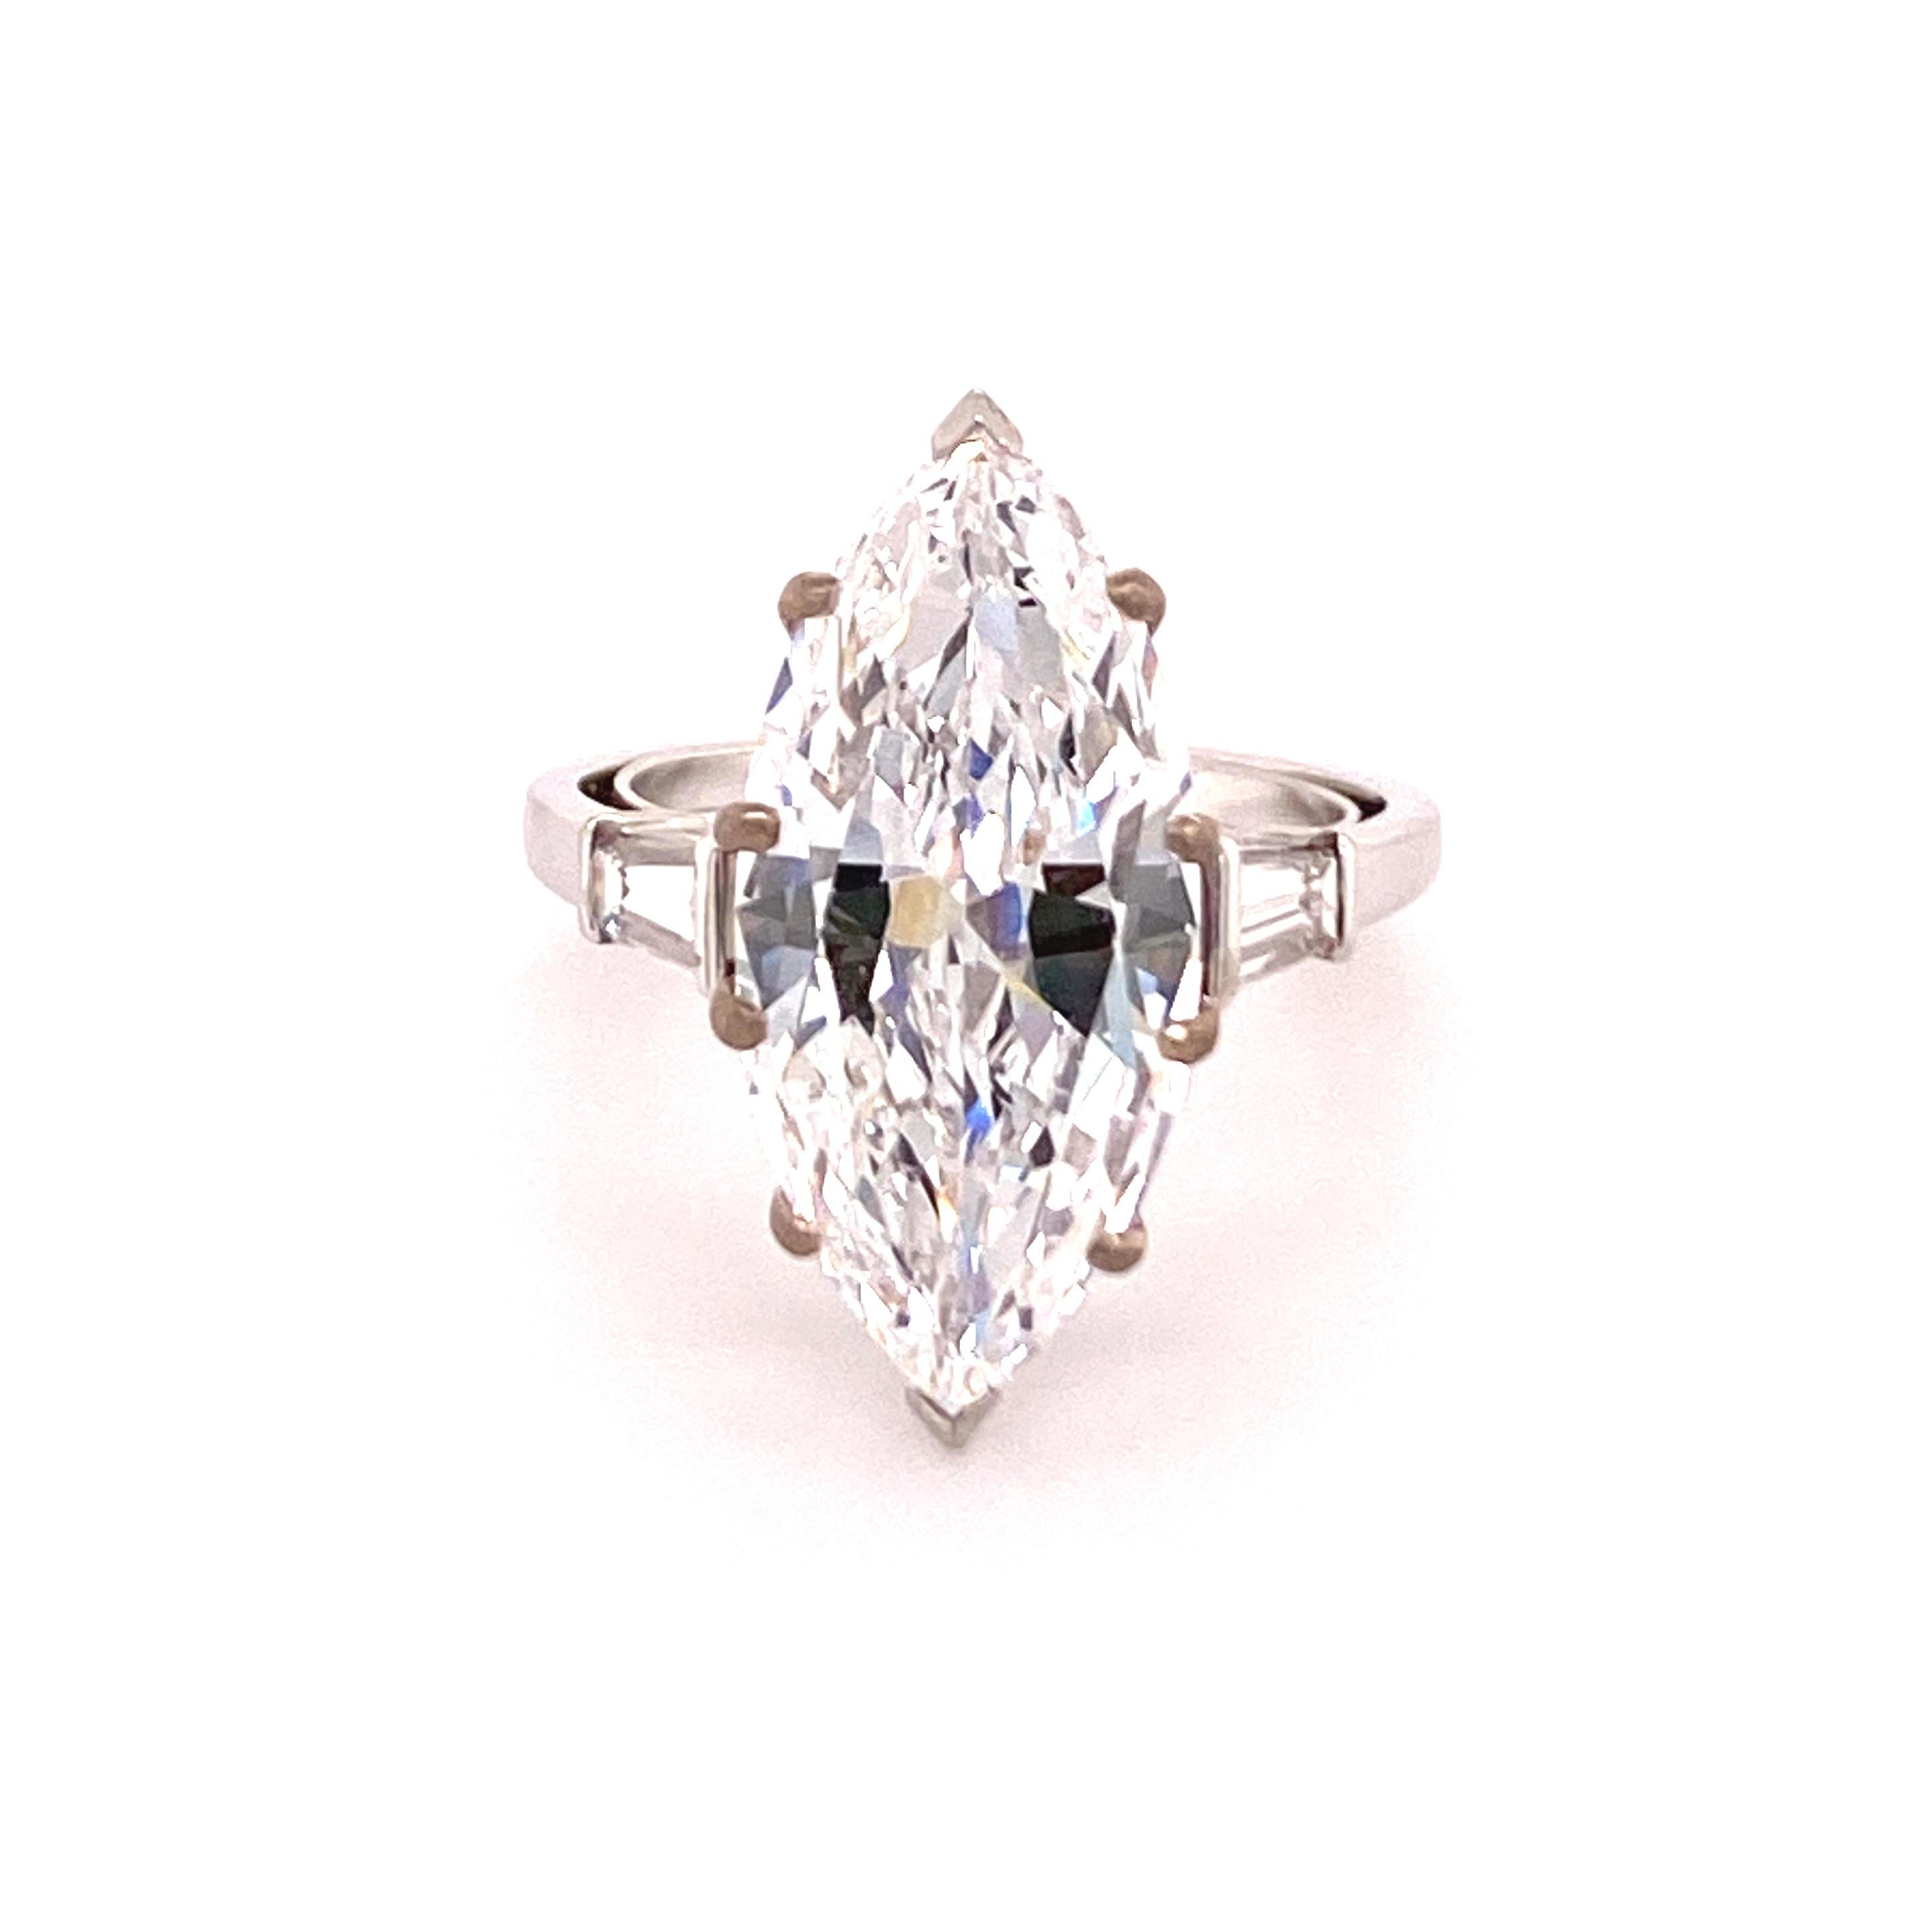 This superb handcrafted ring in platinum 950 features a stunning marquise-cut diamond of 5.60 carats, D colour and vvs2 clarity. 
Accented by two tapered baguette-cut diamonds of F/G colour and vs clarity with a total weight of approximately 0.40